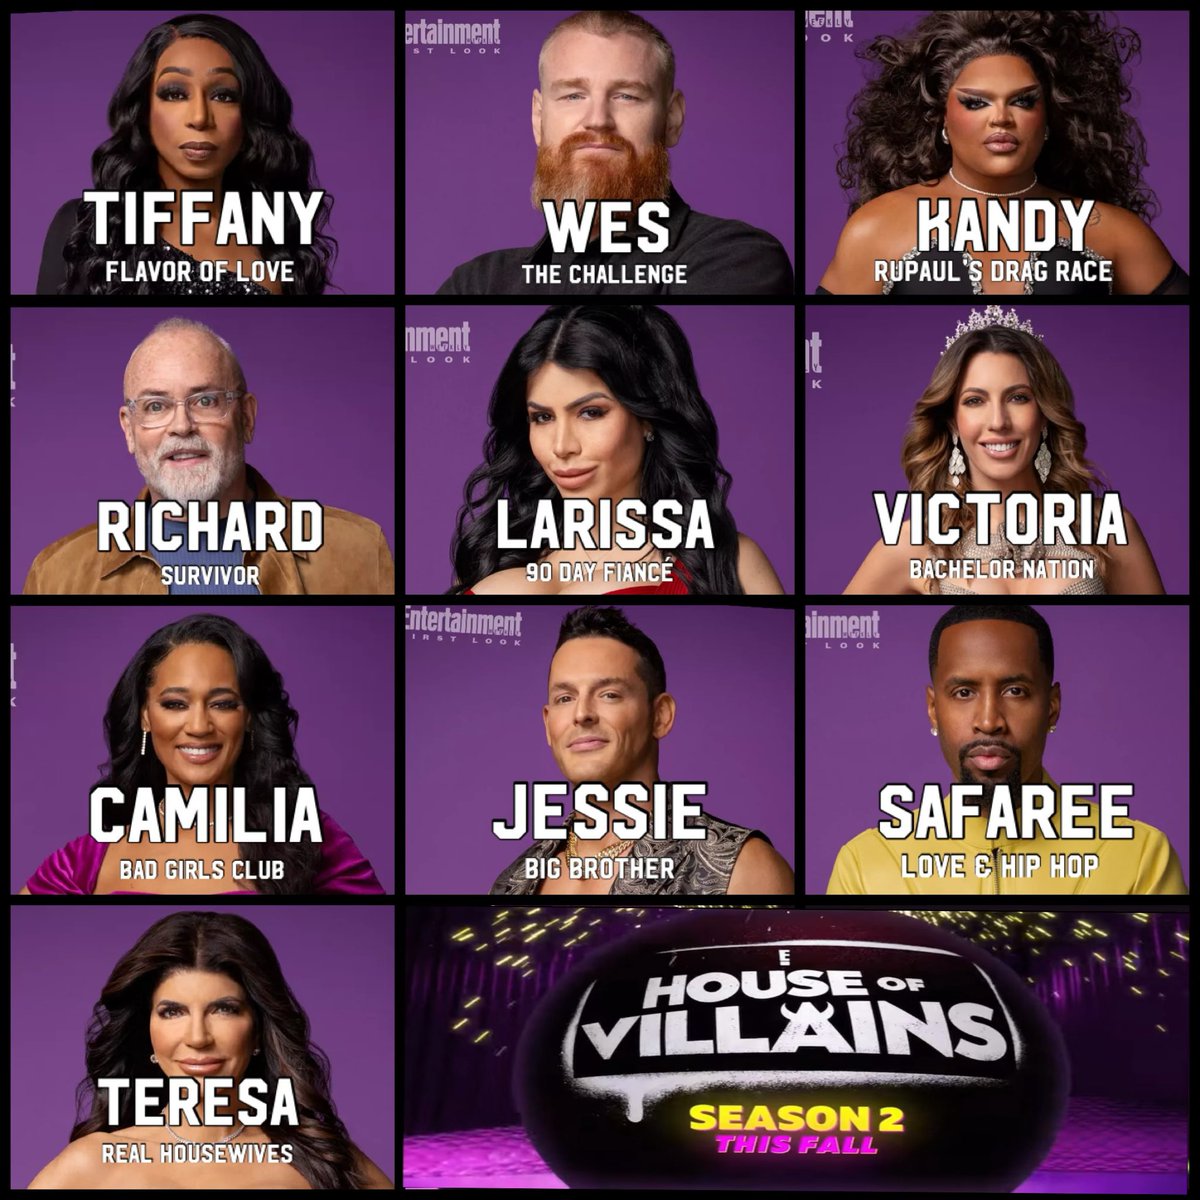 The official cast of House of Villains season 2, premiering this fall on E!.